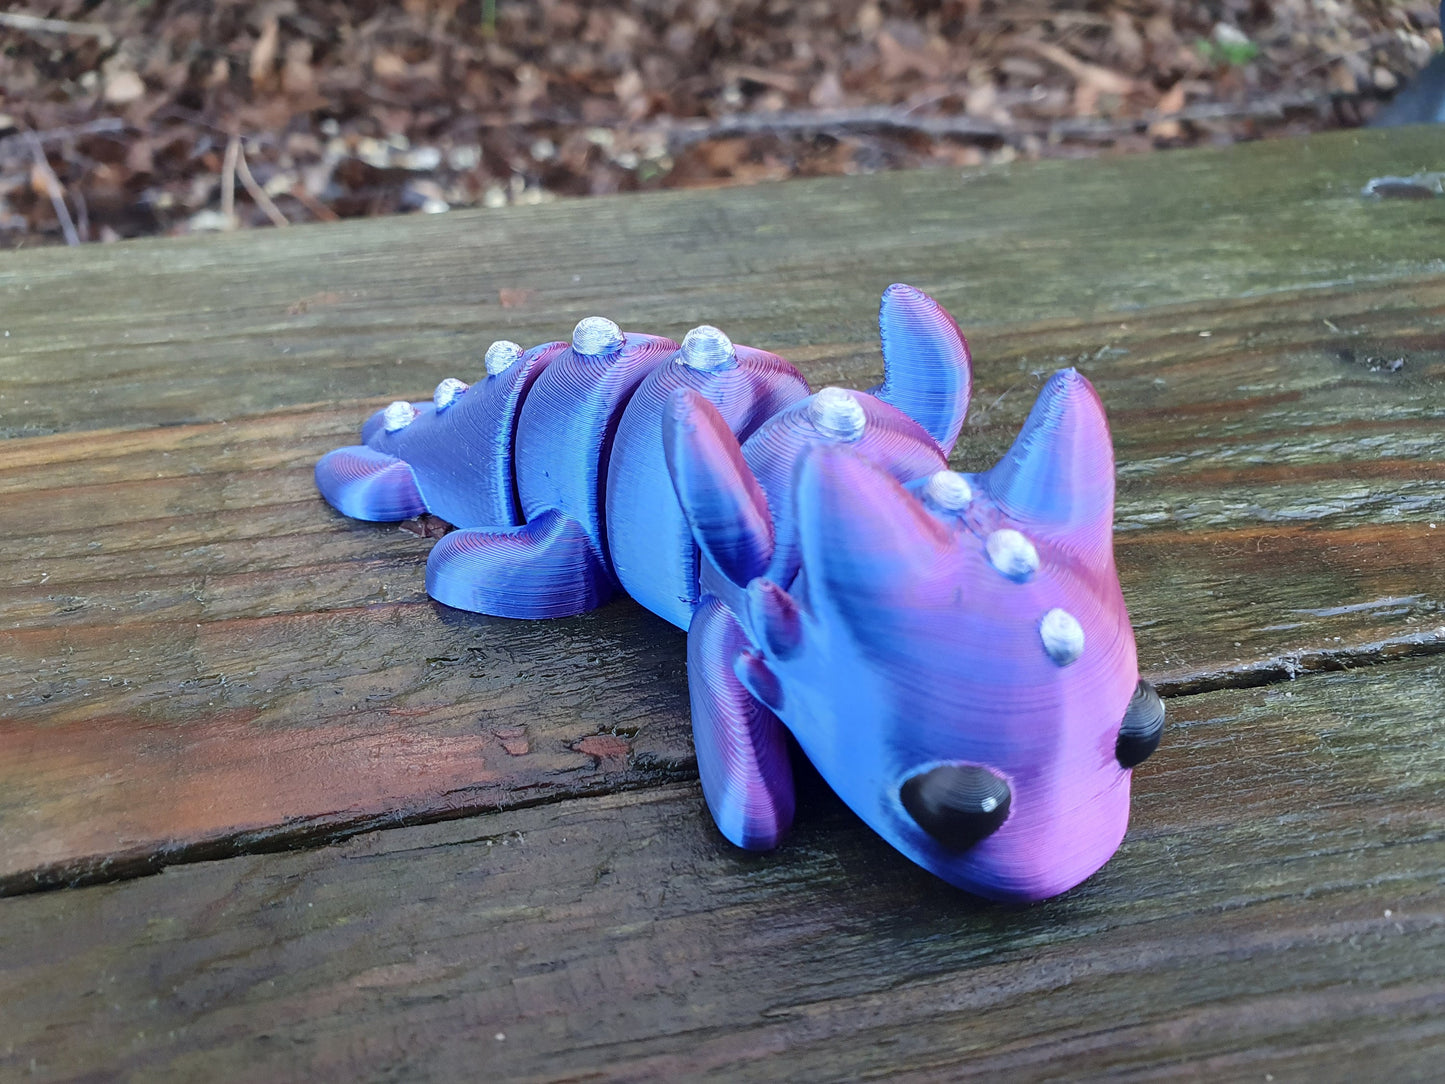 Cute Baby Dragon - Articulated Flexible 3D Print. Professionally Hand painted finishing details